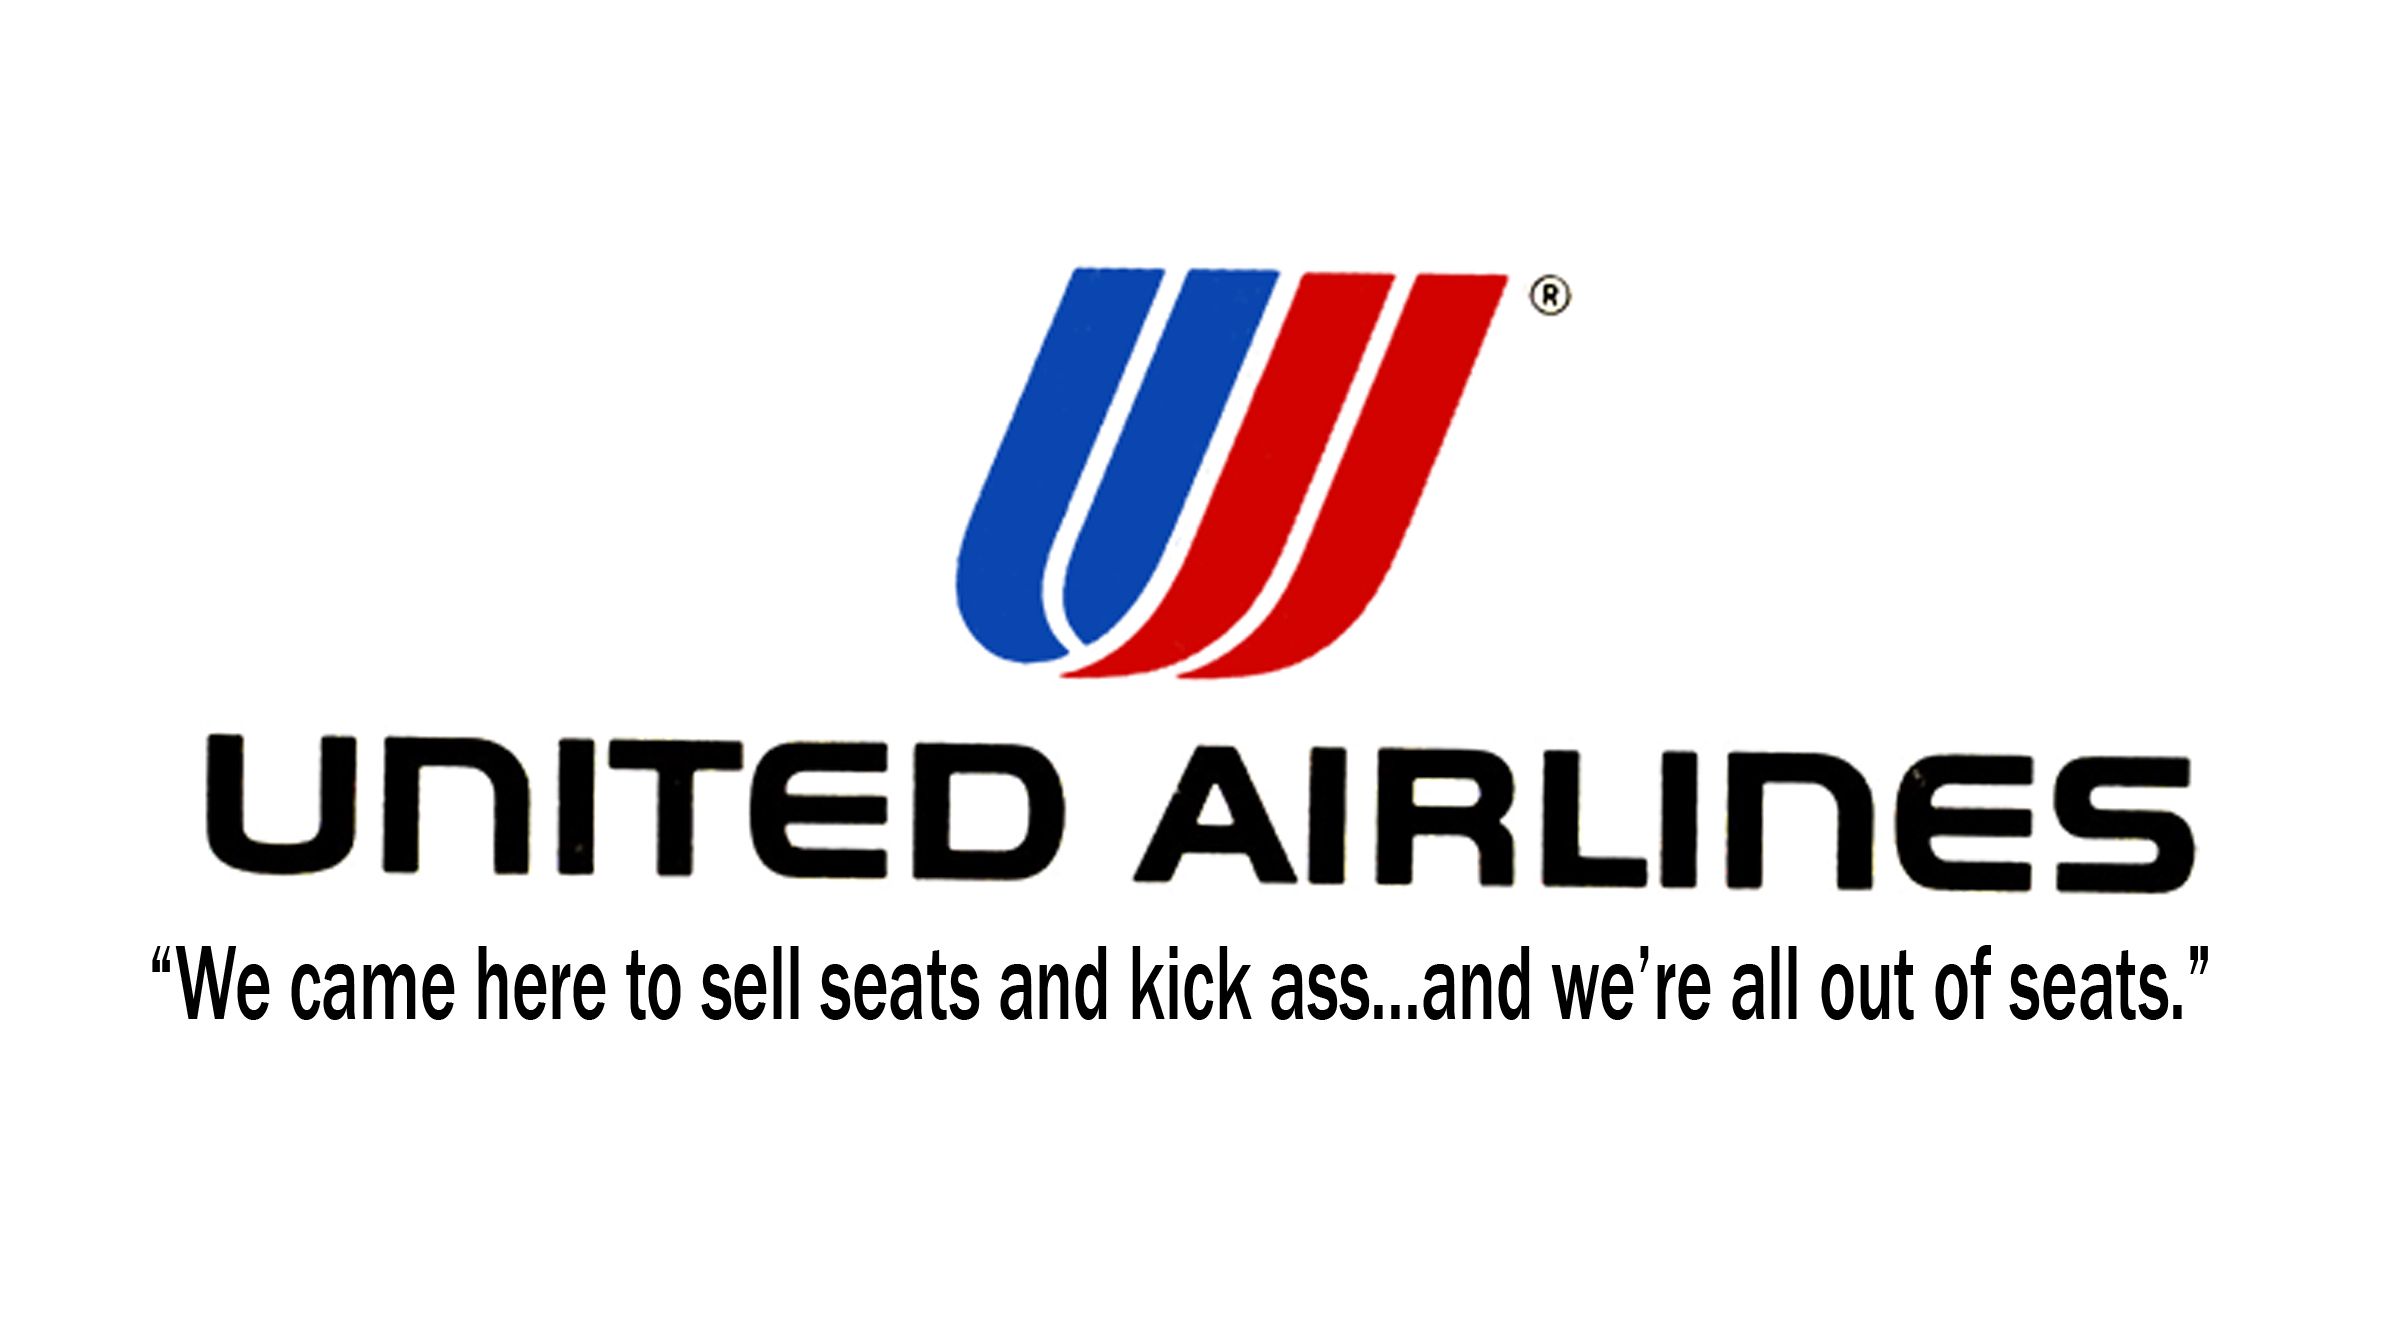 I made a new logo for United Airlines